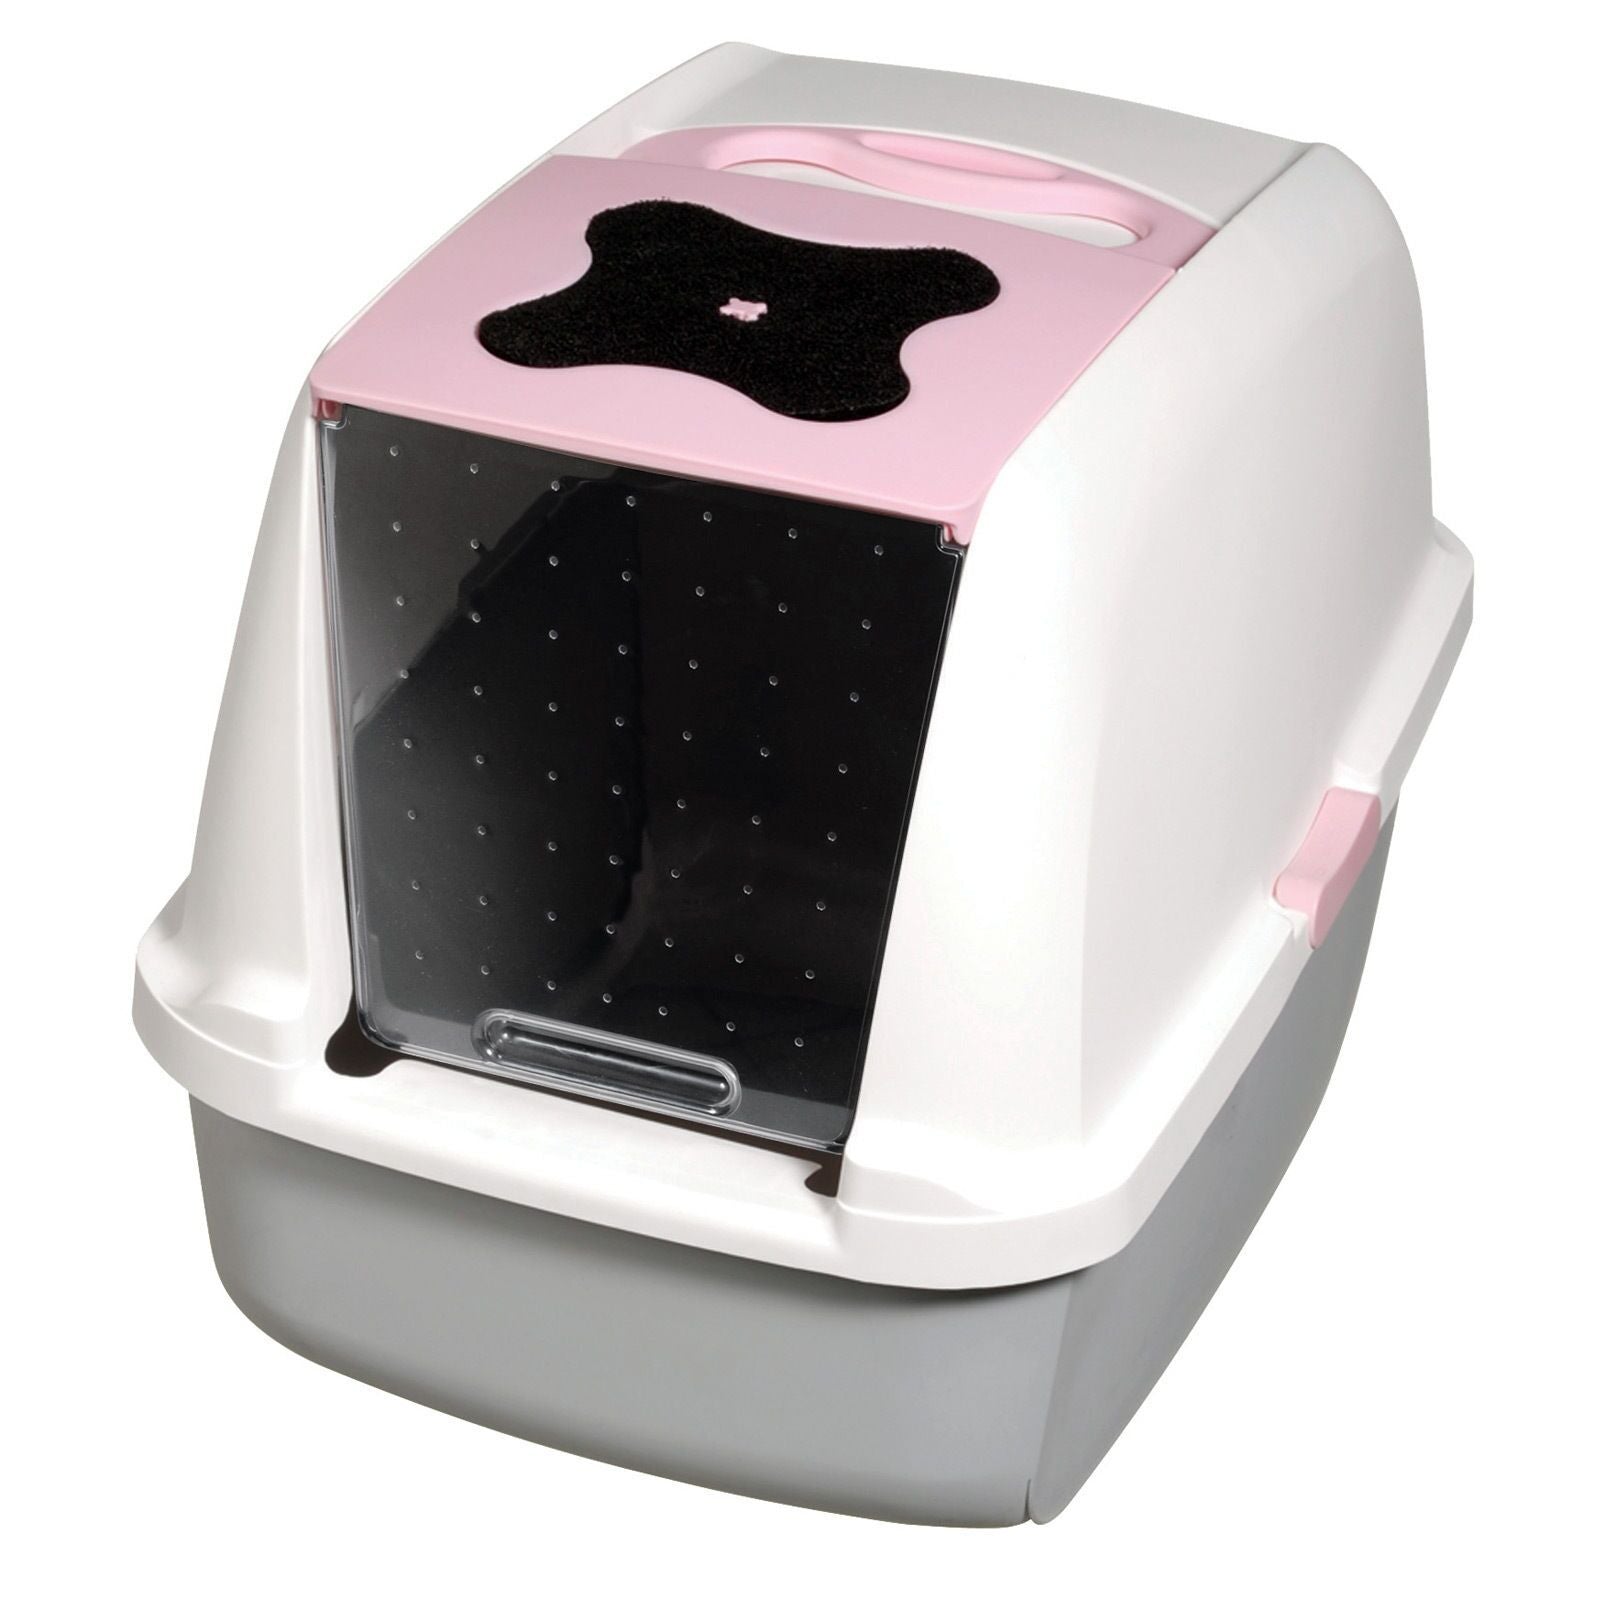 Catit Deluxe Hooded Cat Litter Tray